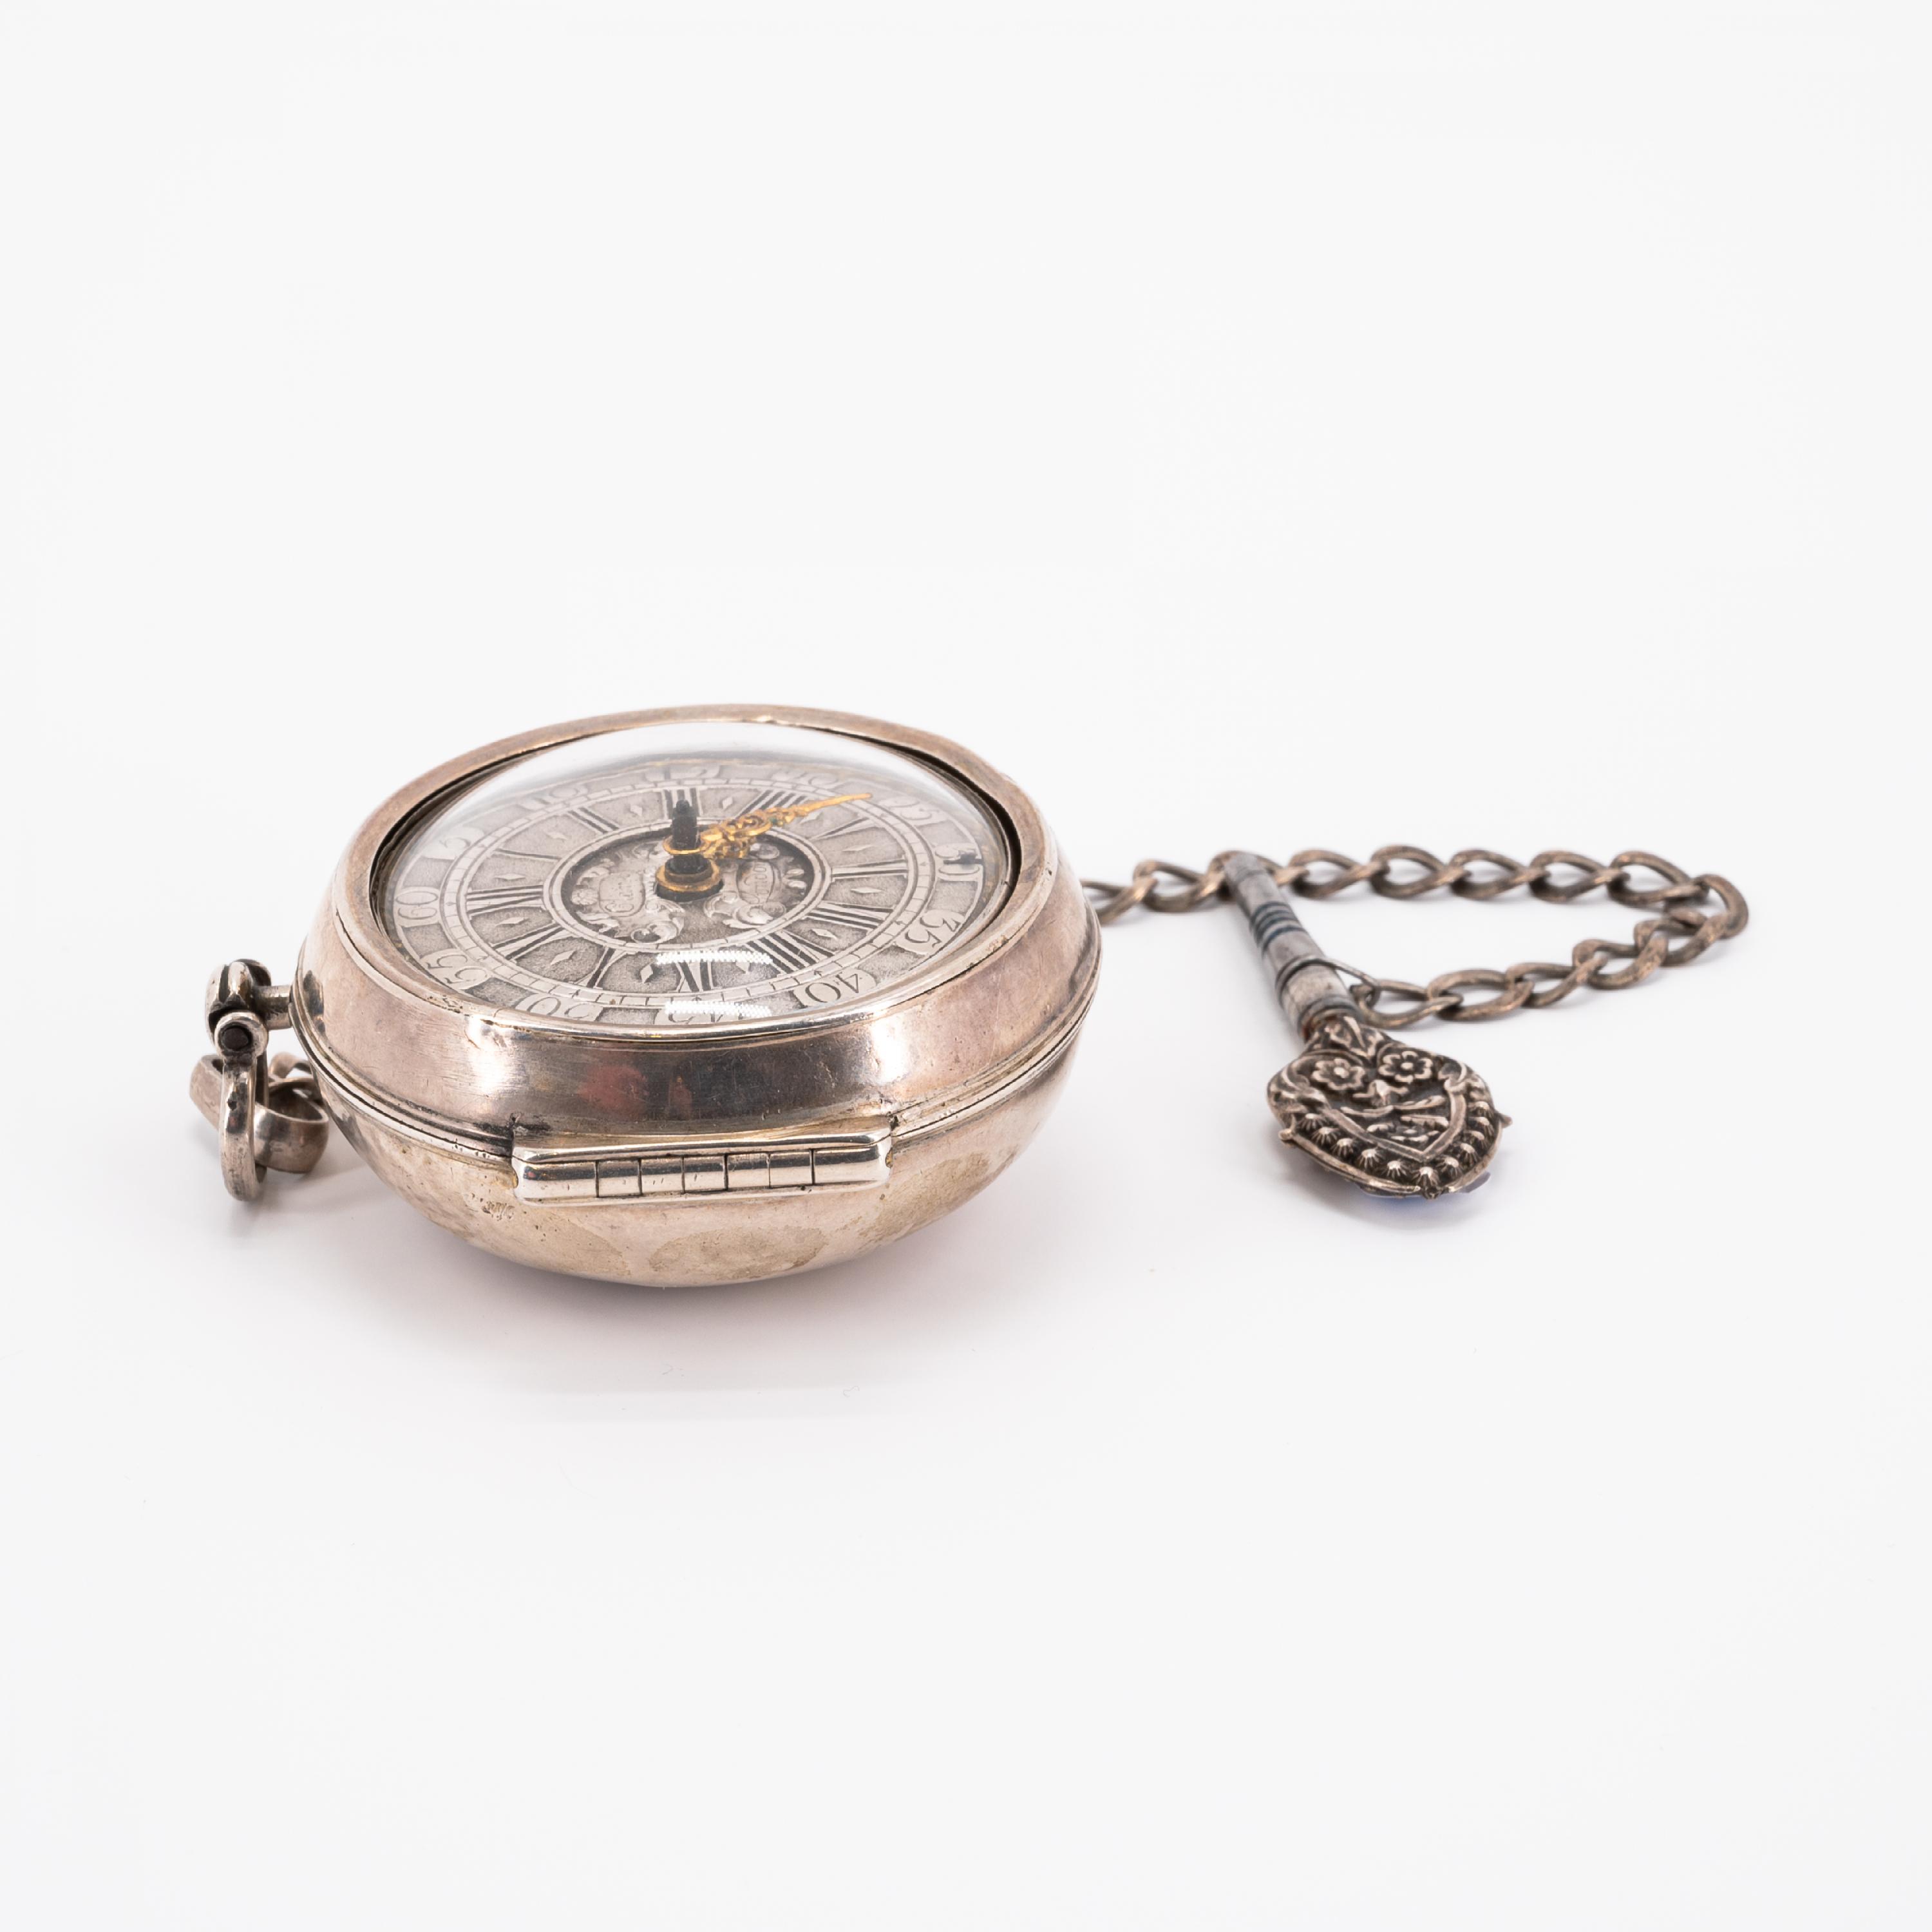 BEAUTIFUL SILVER VERGE WATCH WITH CASE JACKET - Image 5 of 6